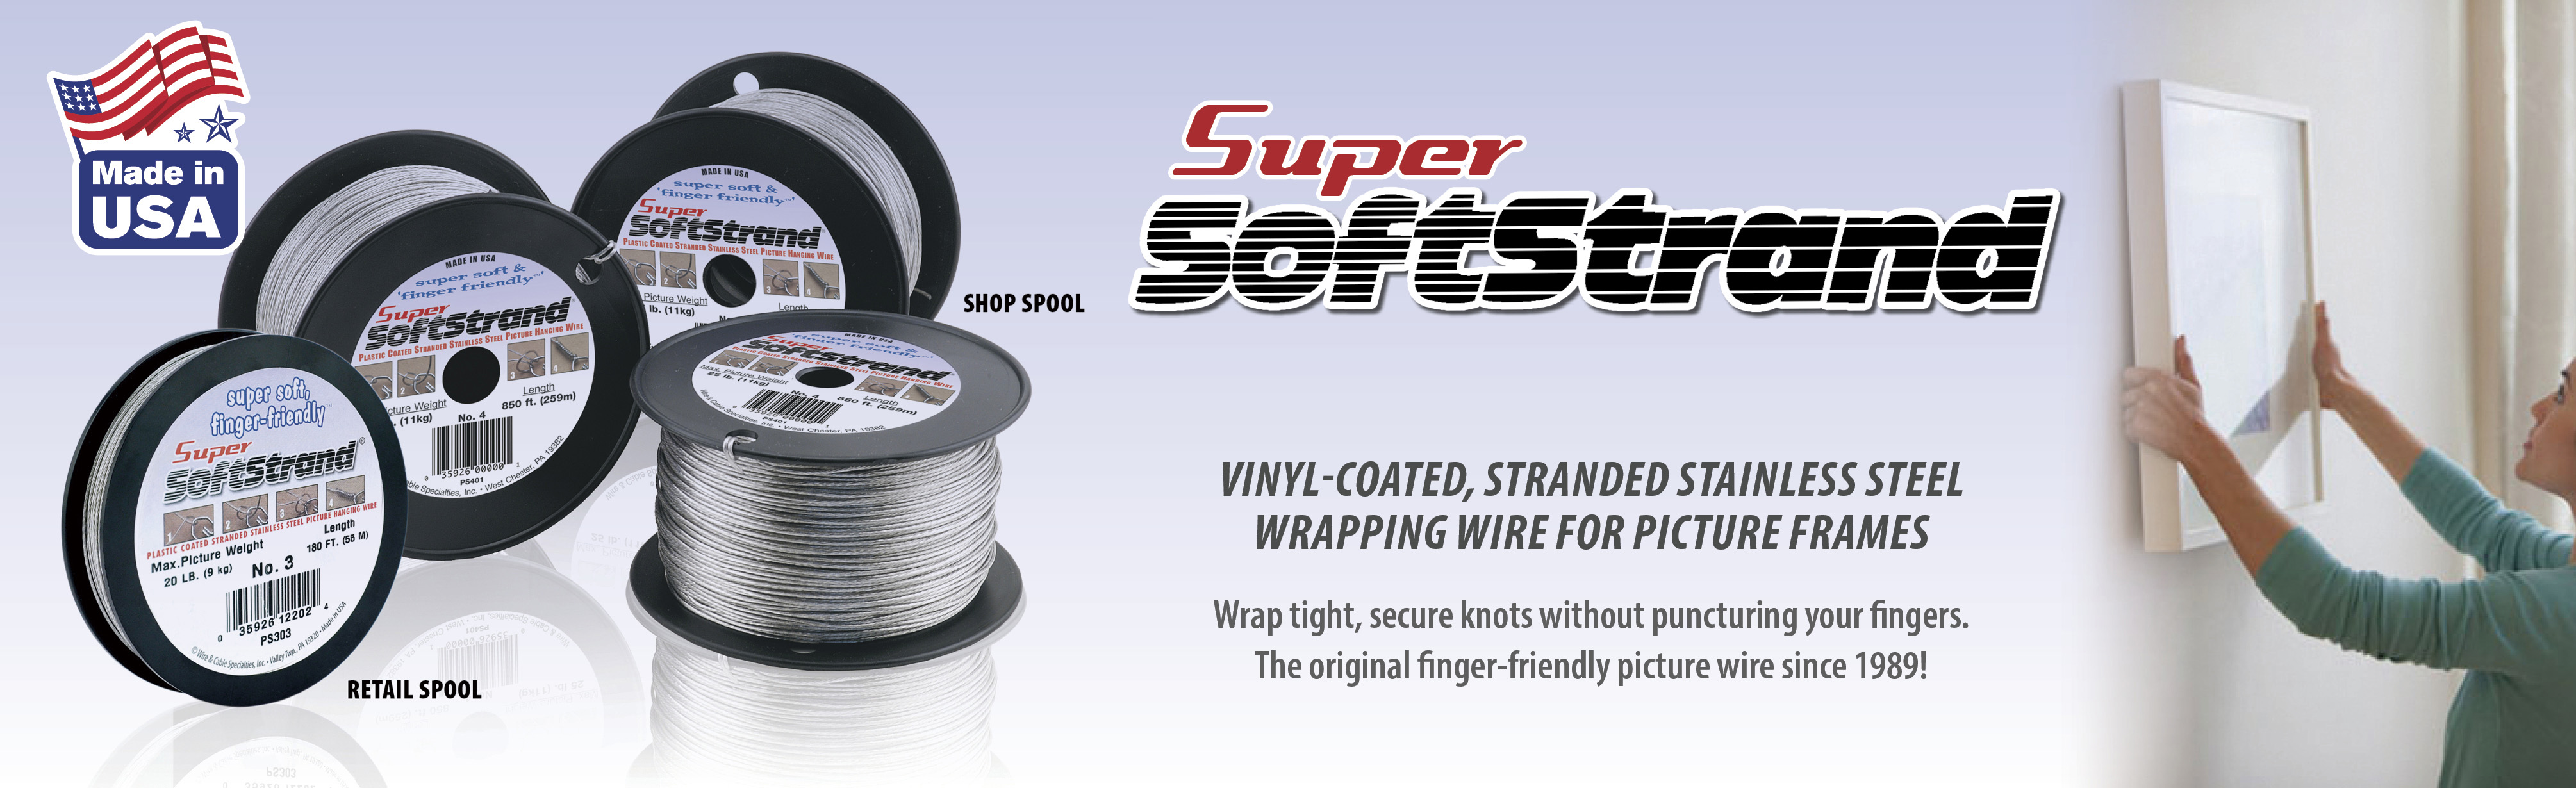 Super SoftStrand Picture Hanging Wire